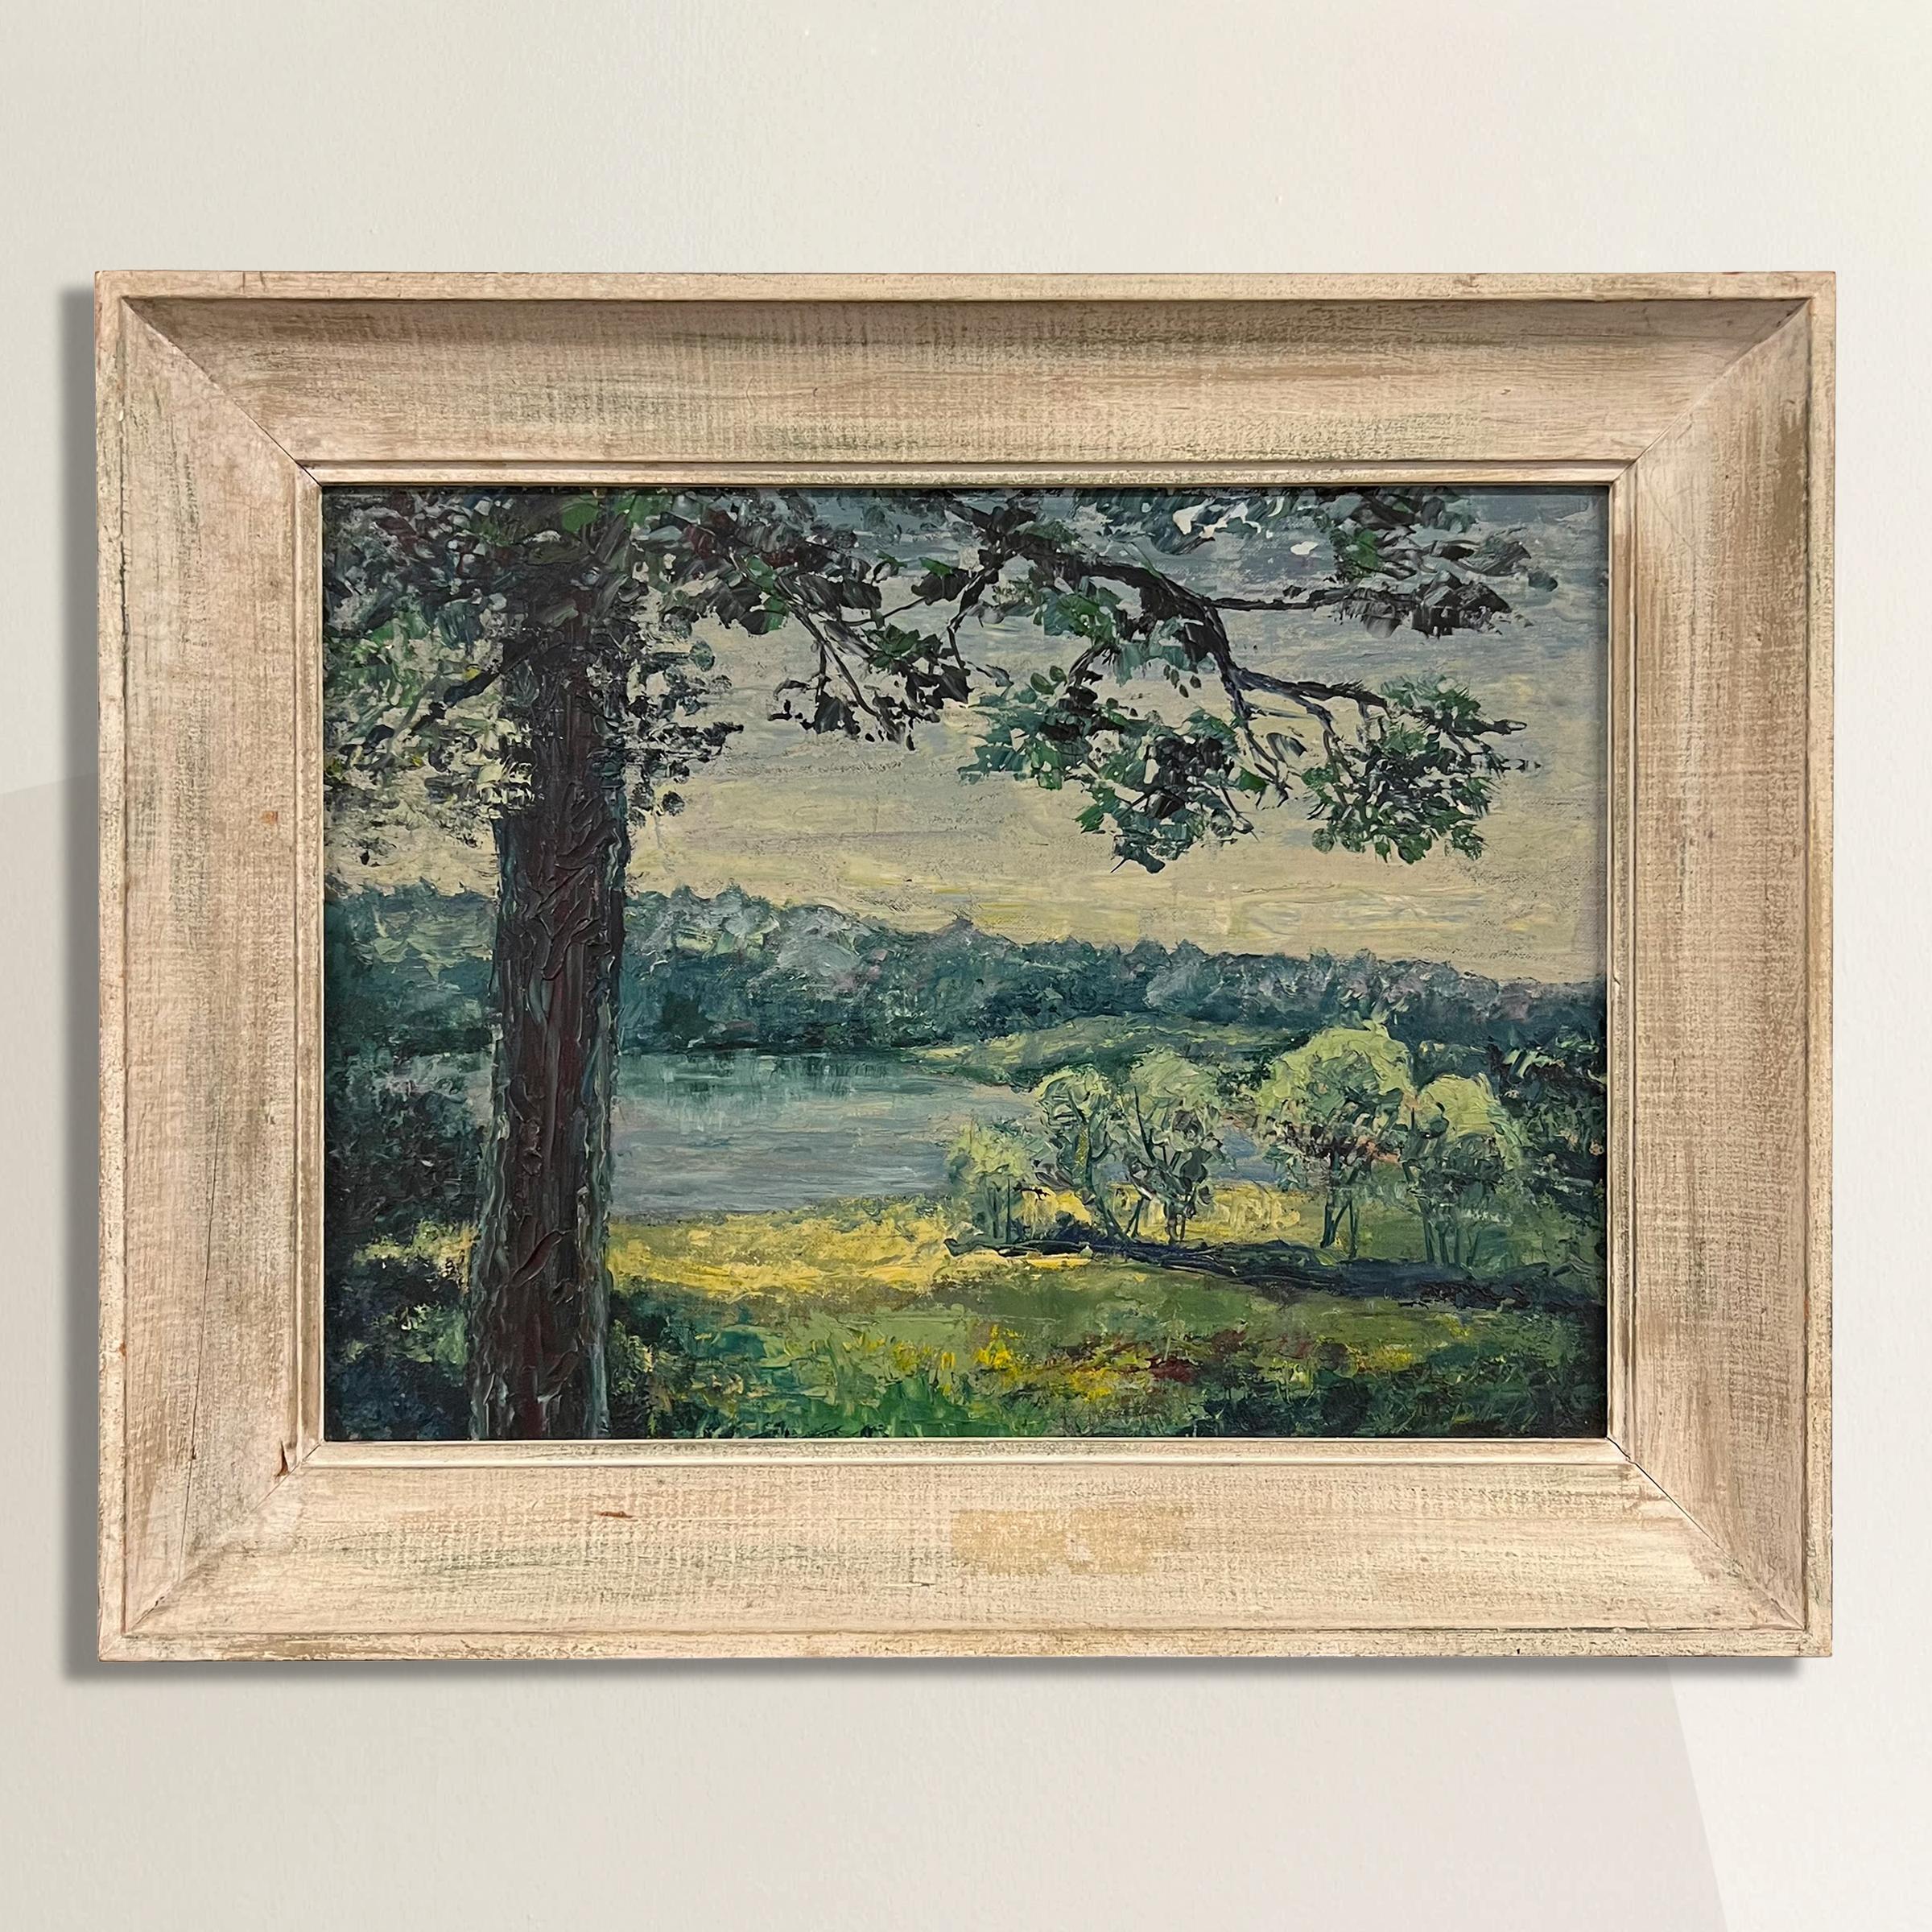 This mid-20th century American plein air painting invites you to a serene lakeside sanctuary.  Framing the composition is a majestic tree in the foreground that stretches towards the heavens and casts gentle shadows over a sunlit meadow. A radiant